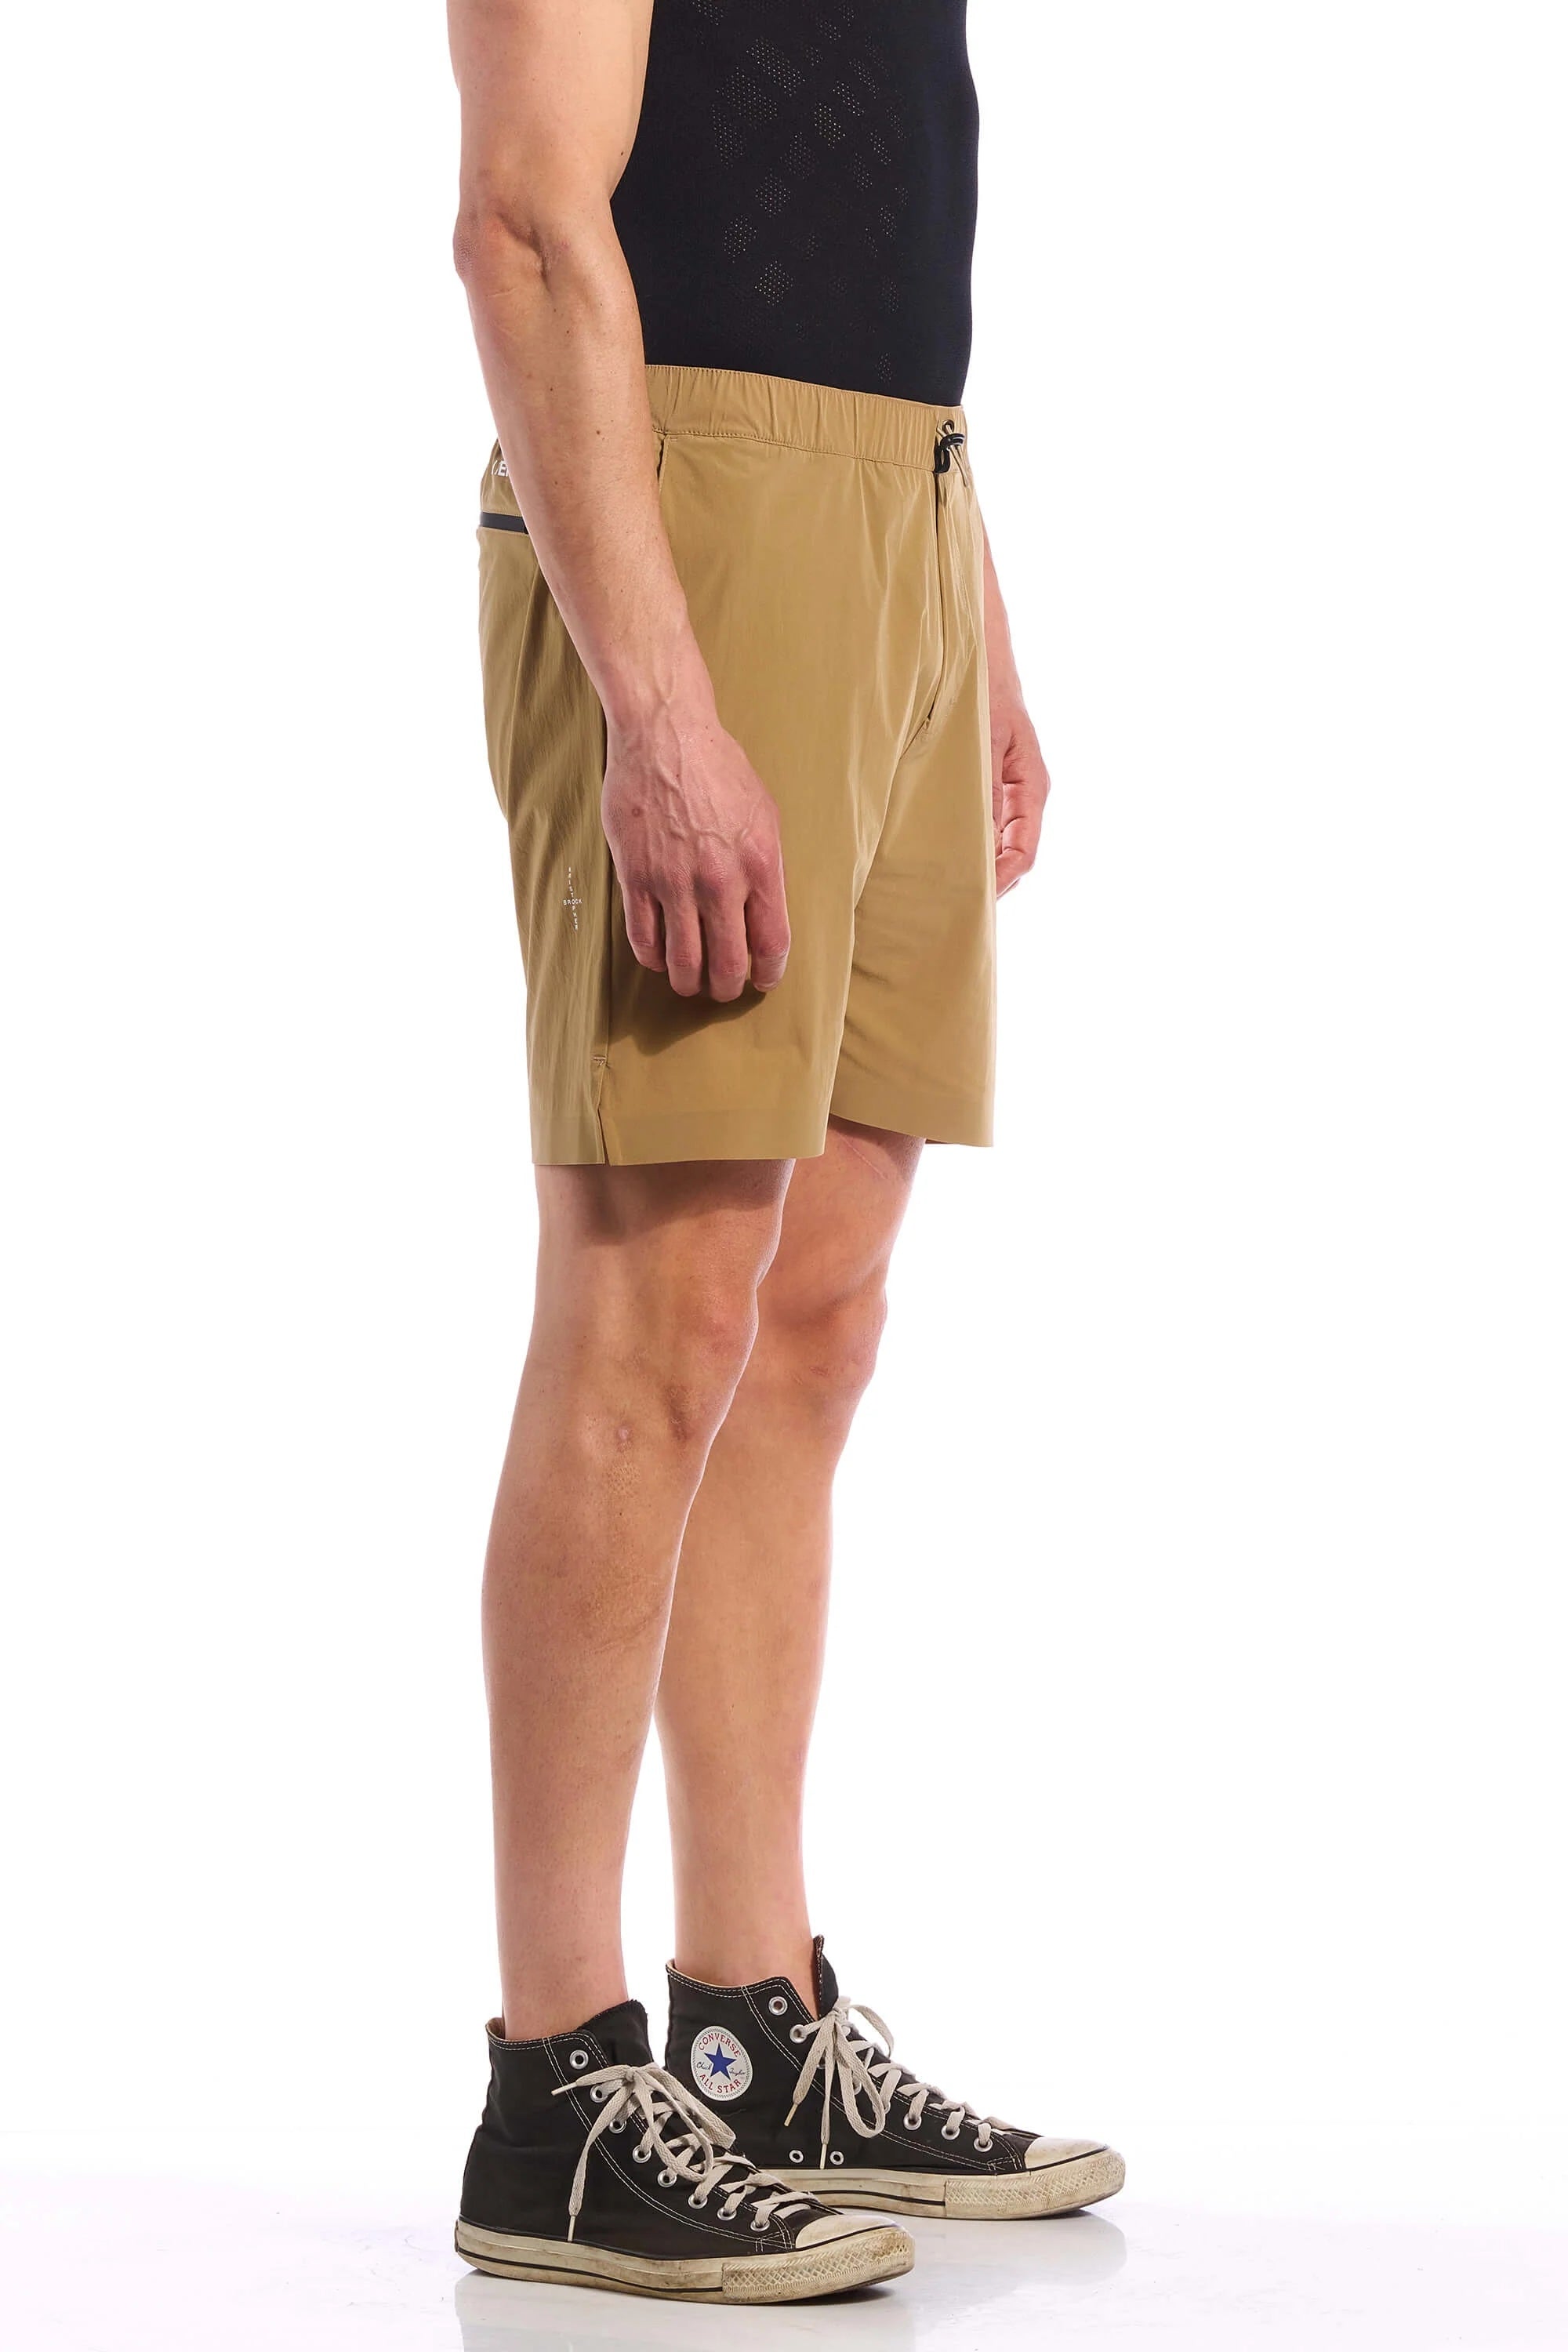 The Active Shorts 8"